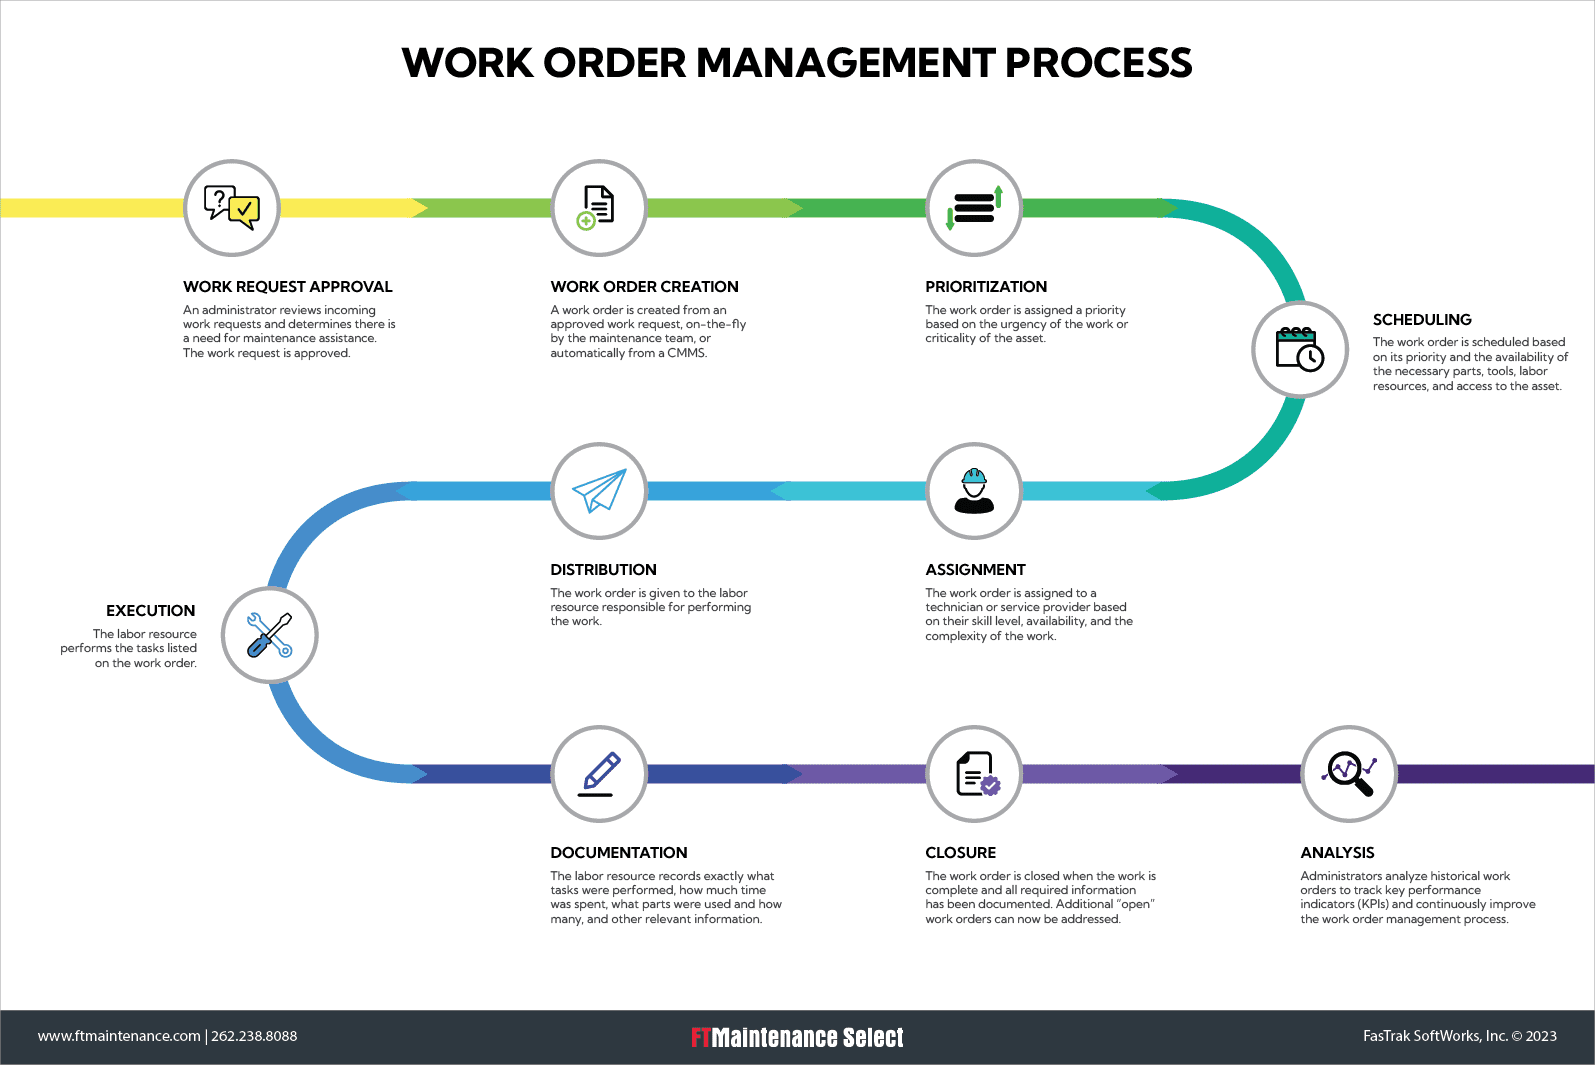 Visualization of the work order management process